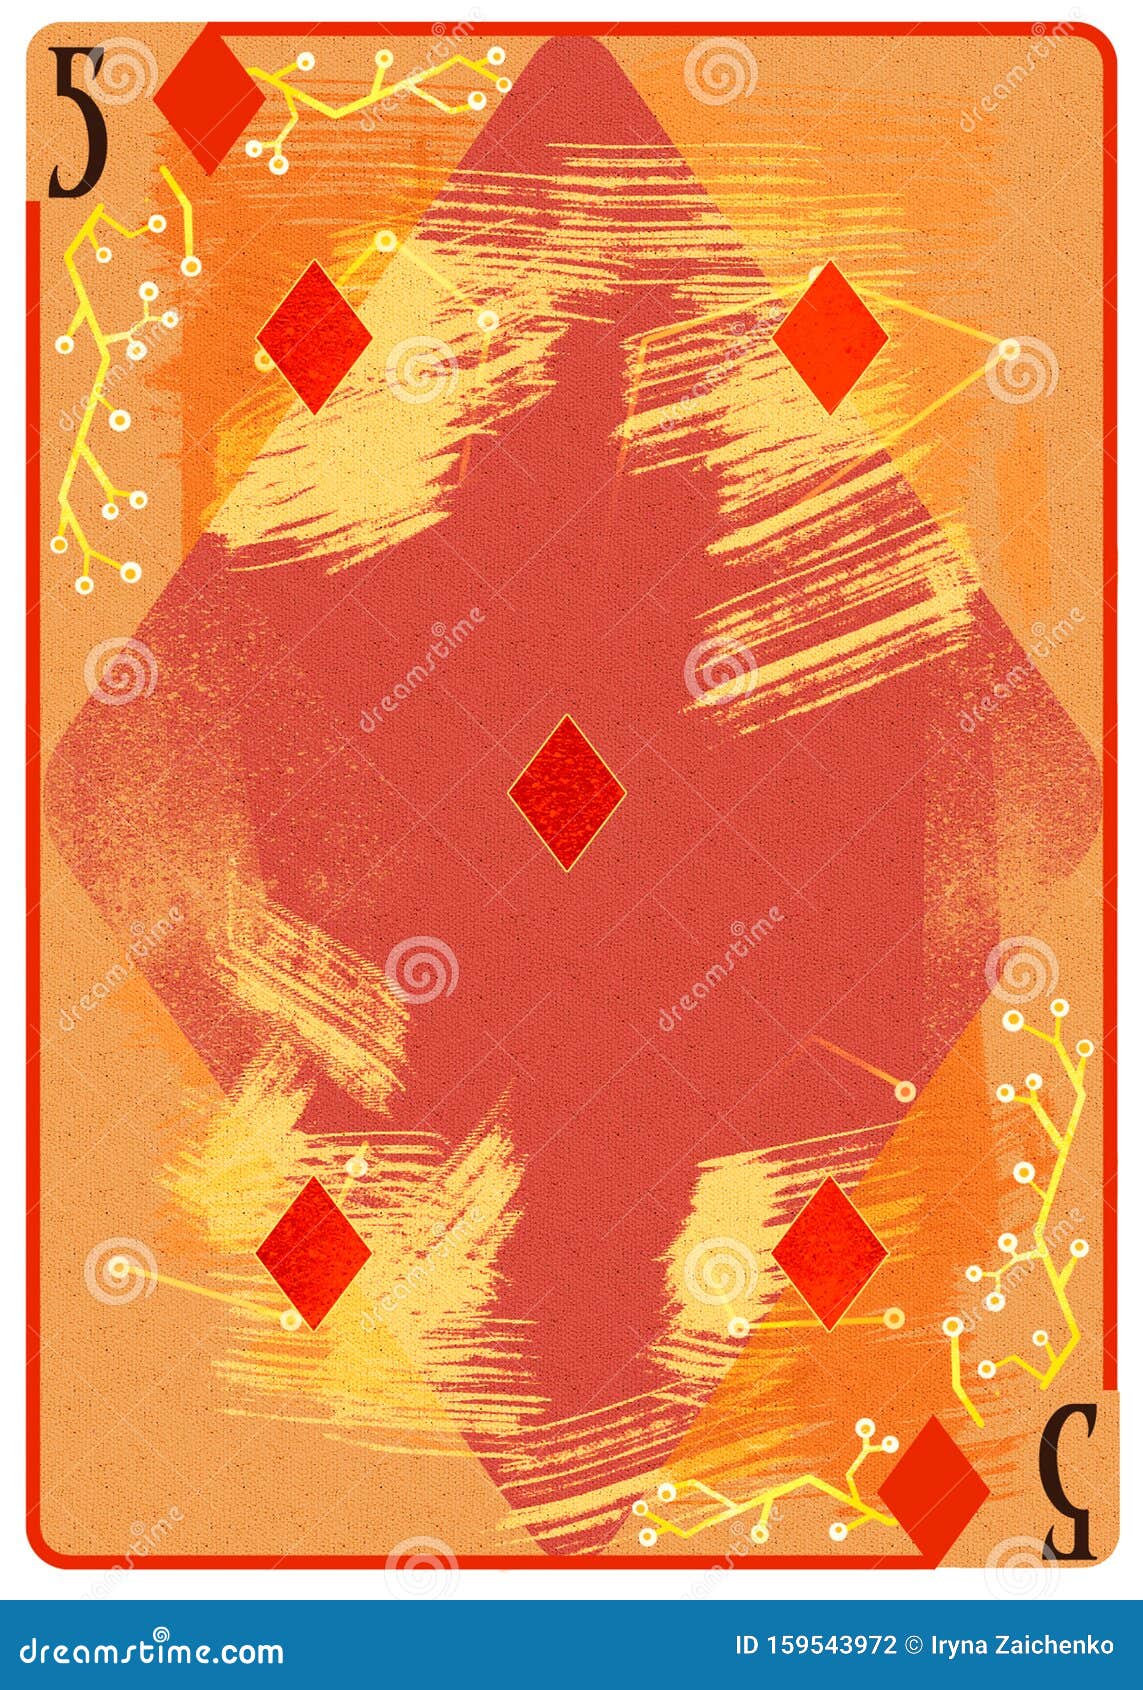 five of diamonds playing card. unique hand drawn pocker card. one of 52 cards in french card deck, english or anglo-american